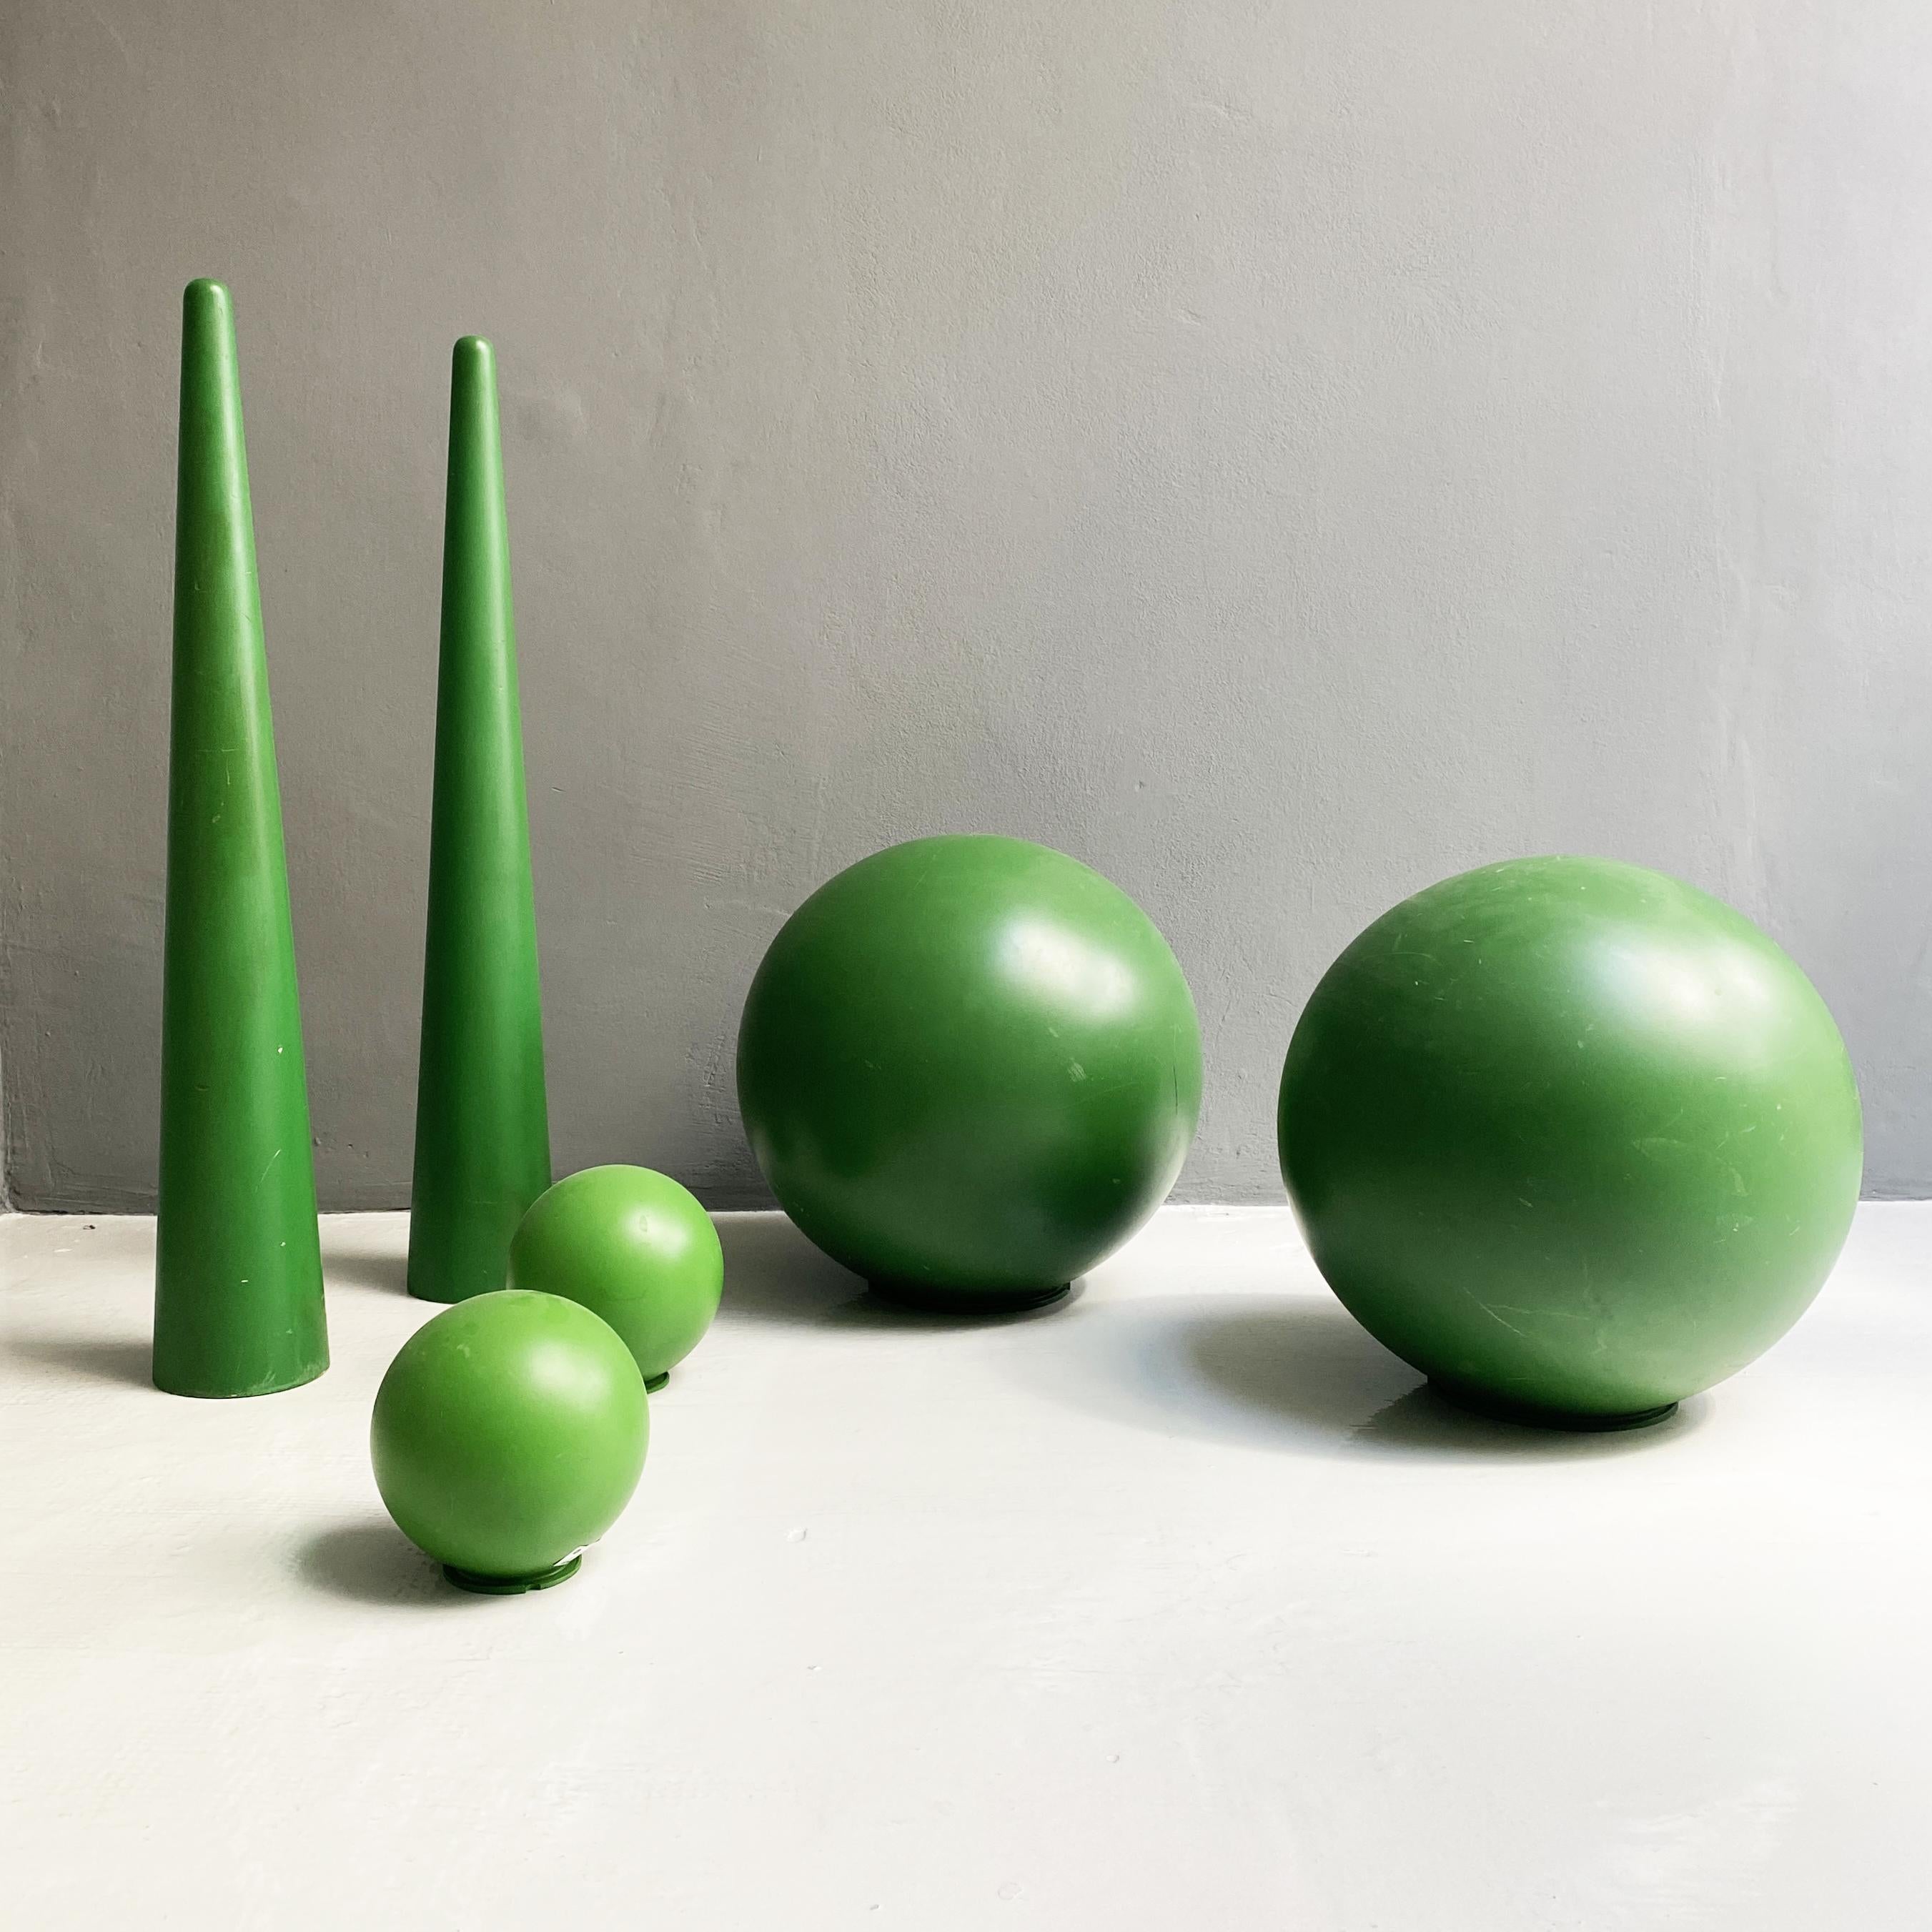 Green plastic props, 1990s
Green plastic props, the set consists of two cones, two large and two small balls. Made in Italy.

Good conditions, light signs.

Measures in cm cone: 17x101h large spheres: 48x54 small spheres: 21x20h.